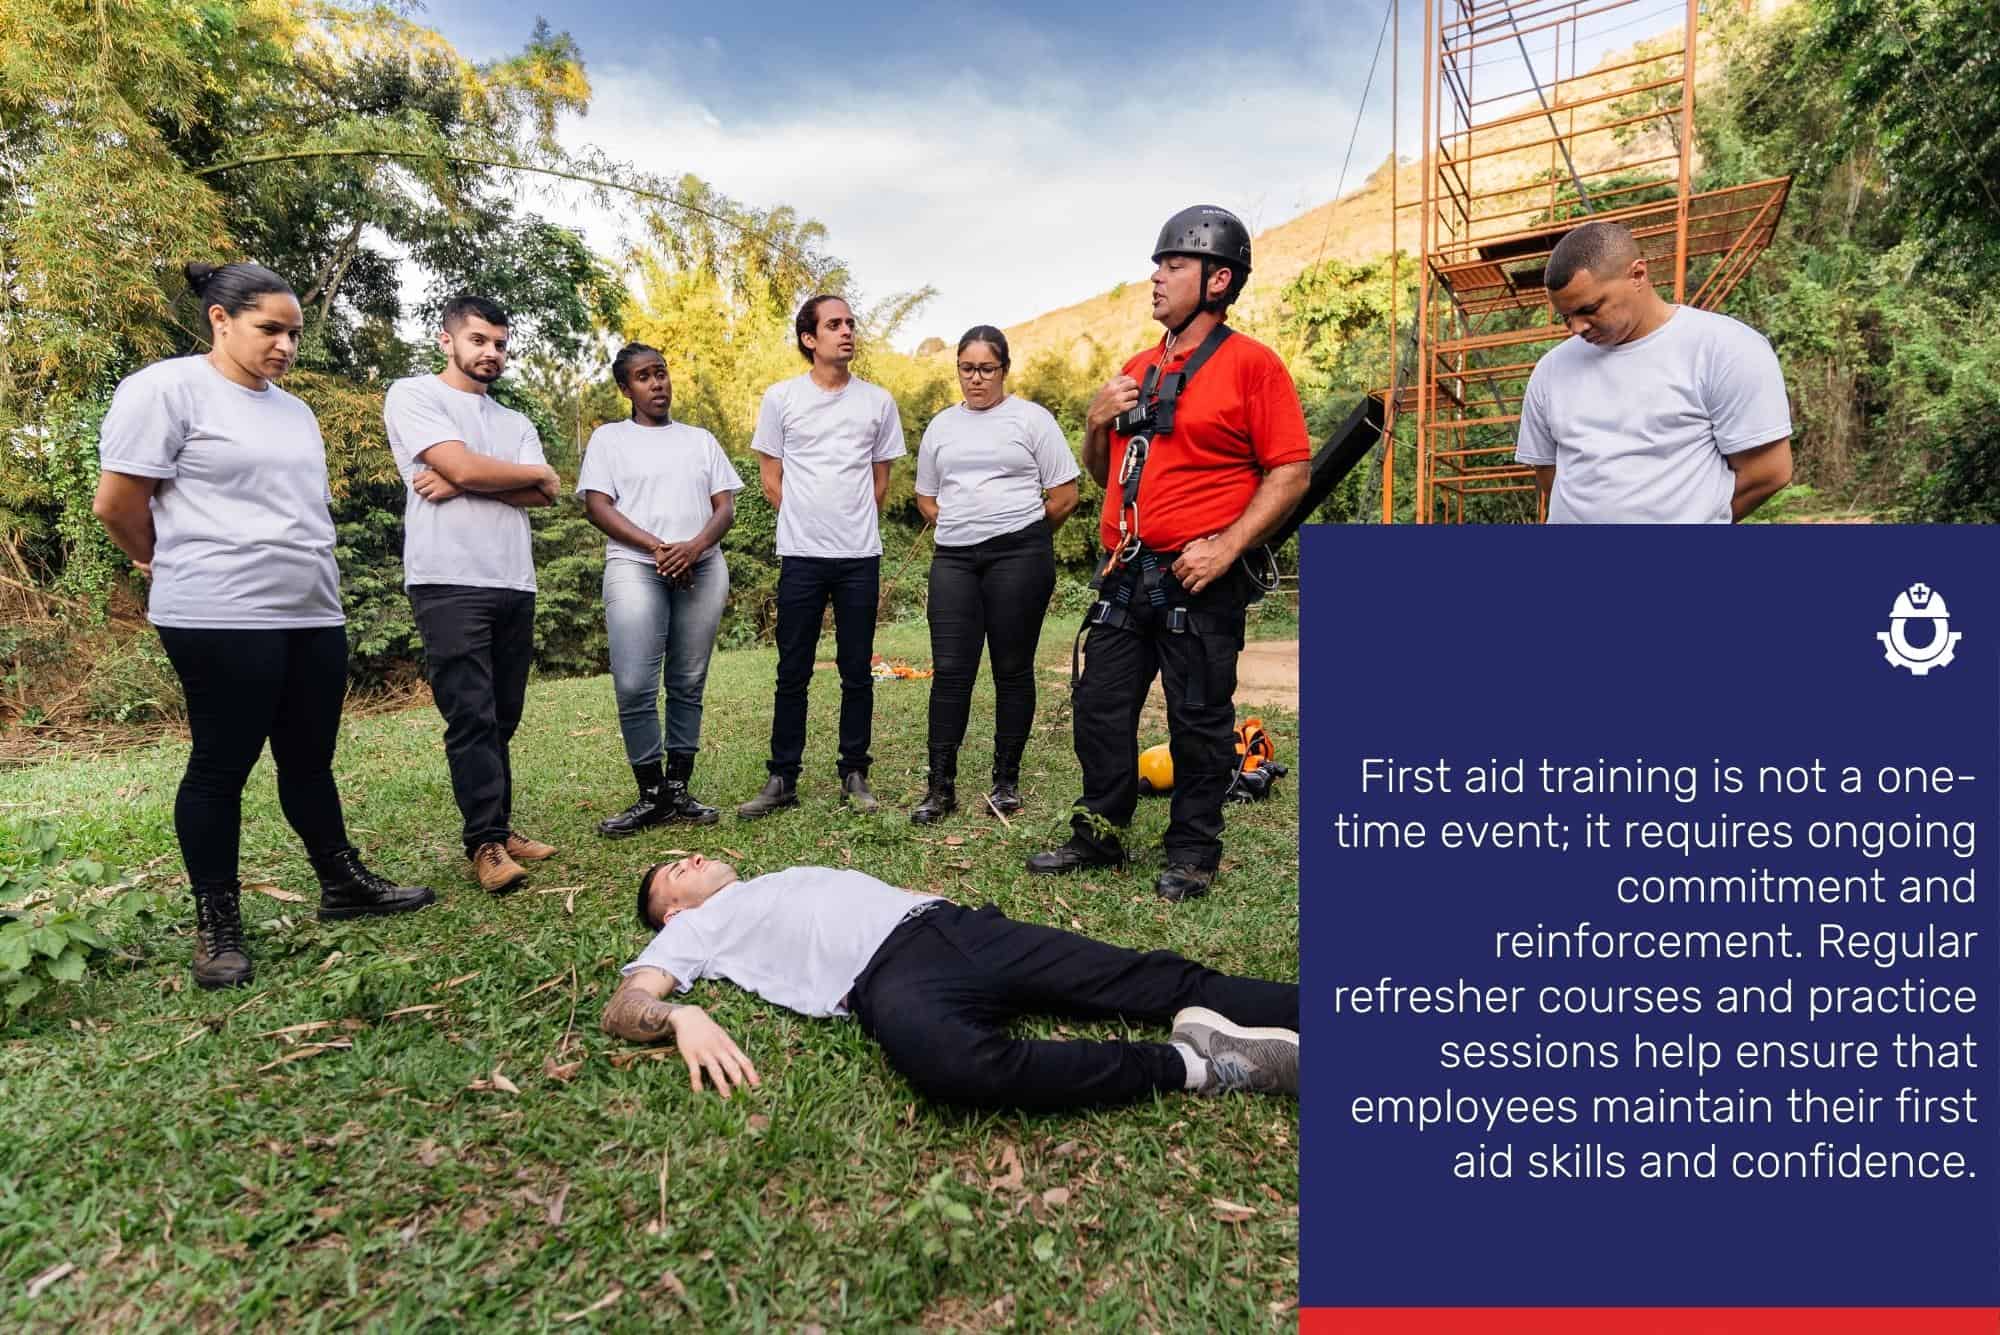 The ongoing commitment to first aid training